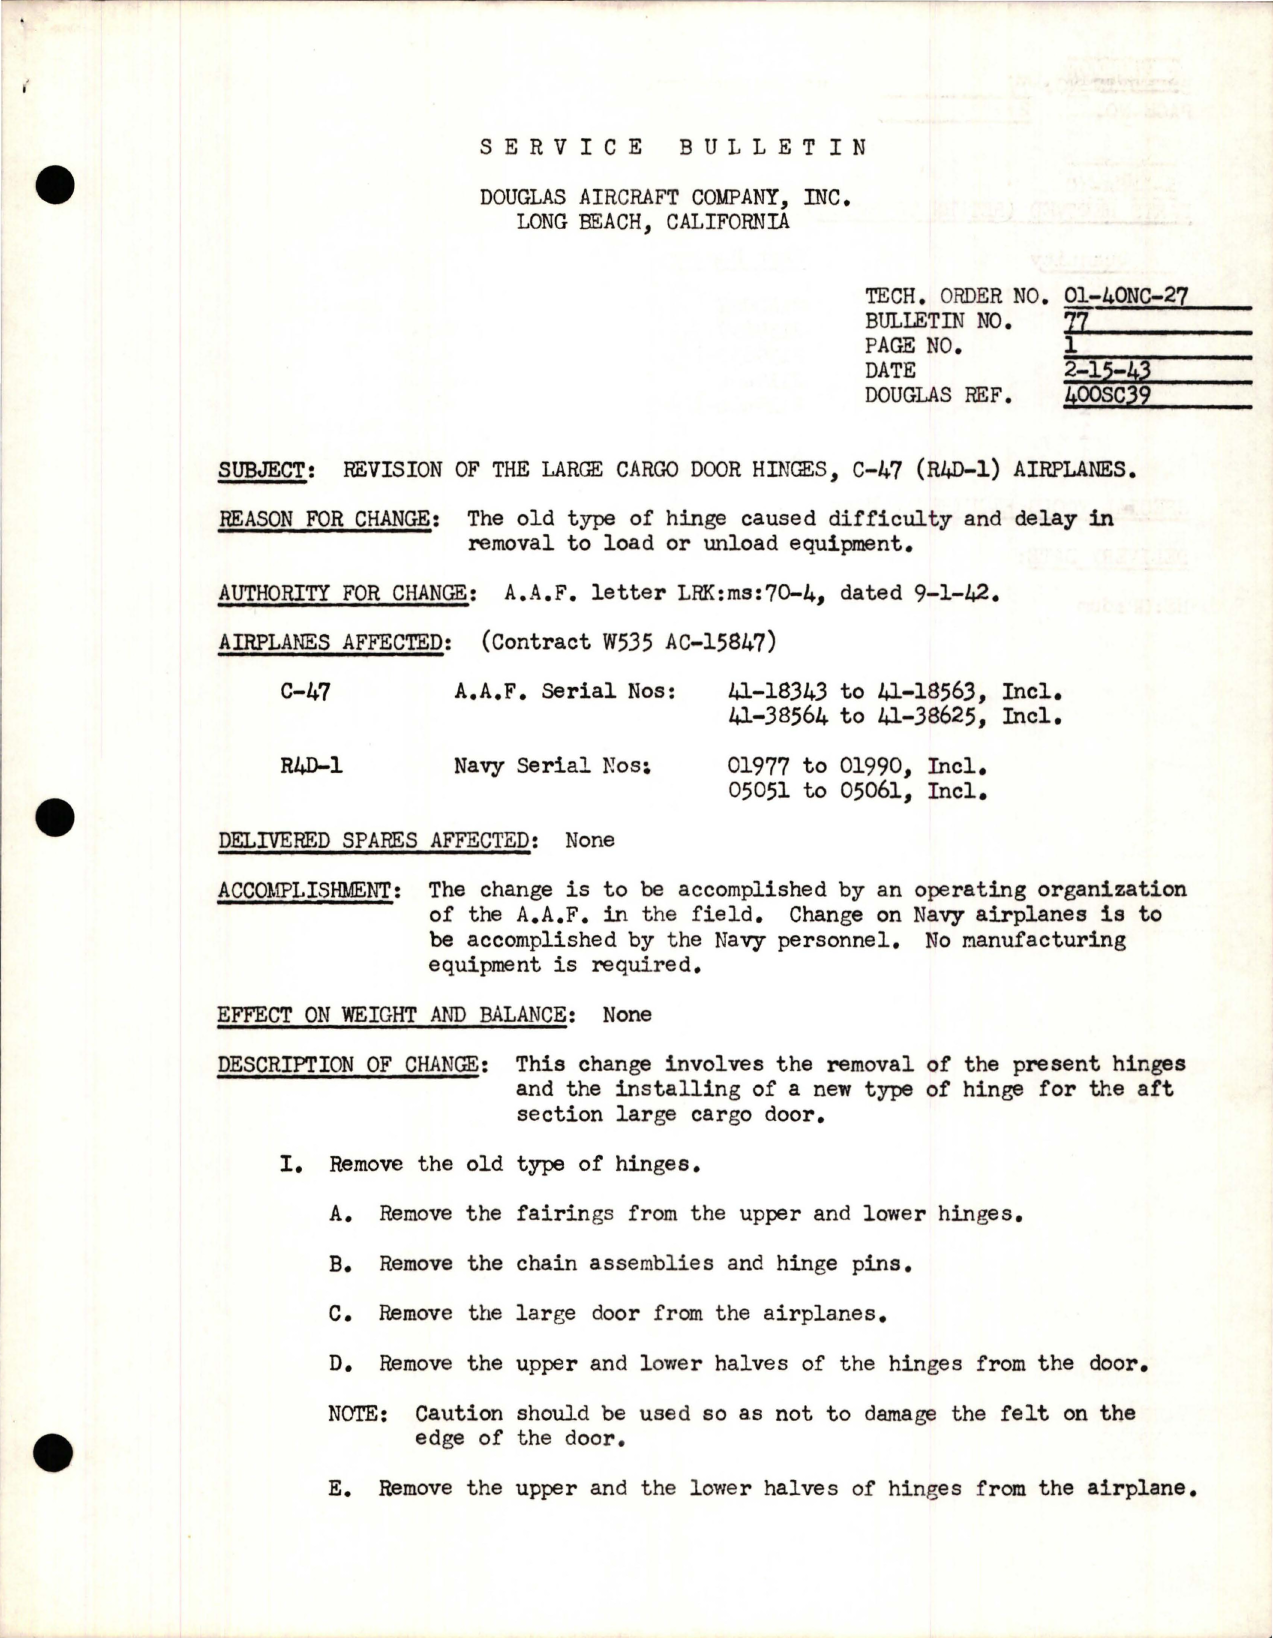 Sample page 1 from AirCorps Library document: Revision of the Large Cargo Door Hinges